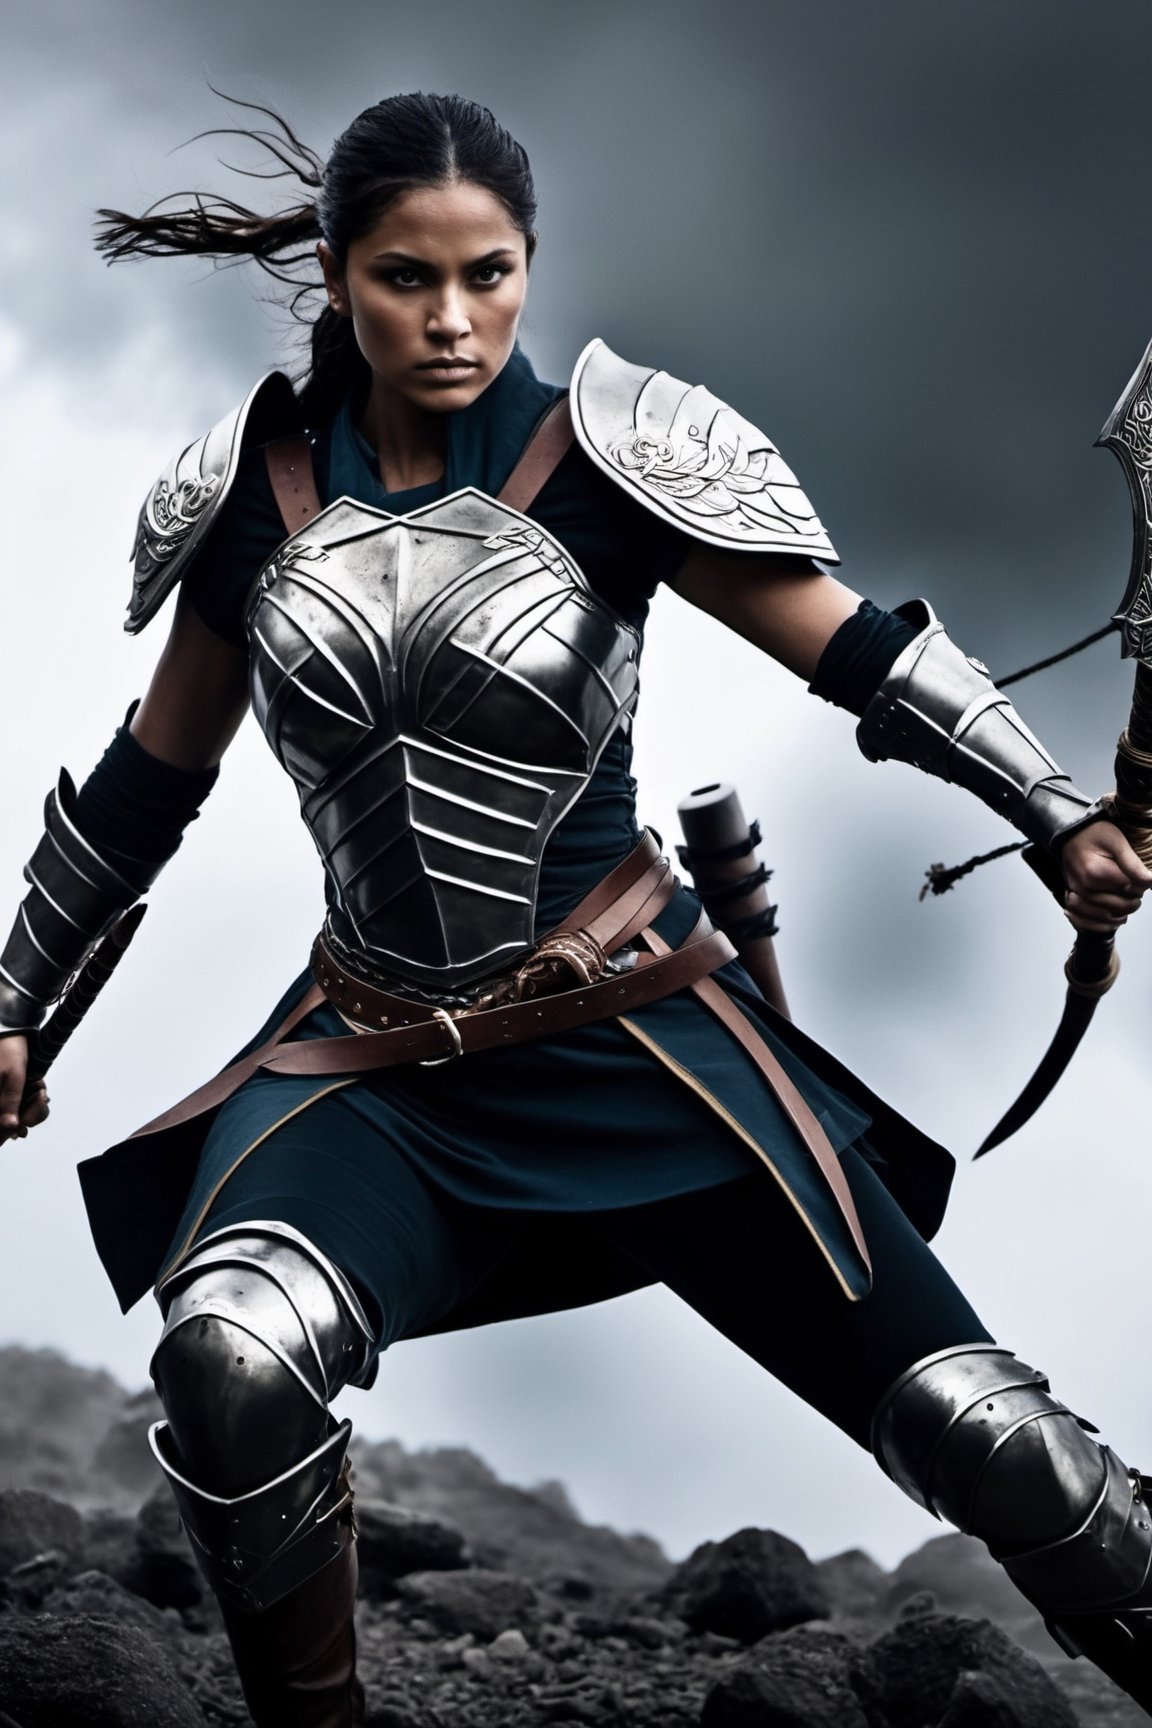 Amidst the chaos and carnage of the battlefield, a fierce and fearless woman warrior emerges, her battle-worn armor glistening with sweat and determination. With a steely gaze and a sword held high, she commands respect and strikes fear into the hearts of her enemies. Her movements are fluid and precise, a deadly dance of agility and strength. The sound of her war cries echoes through the air, inspiring courage in her allies and striking terror in the hearts of her foes. With every swing of her weapon, she fights with unwavering resolve, protecting her comrades and defending what she holds dear.